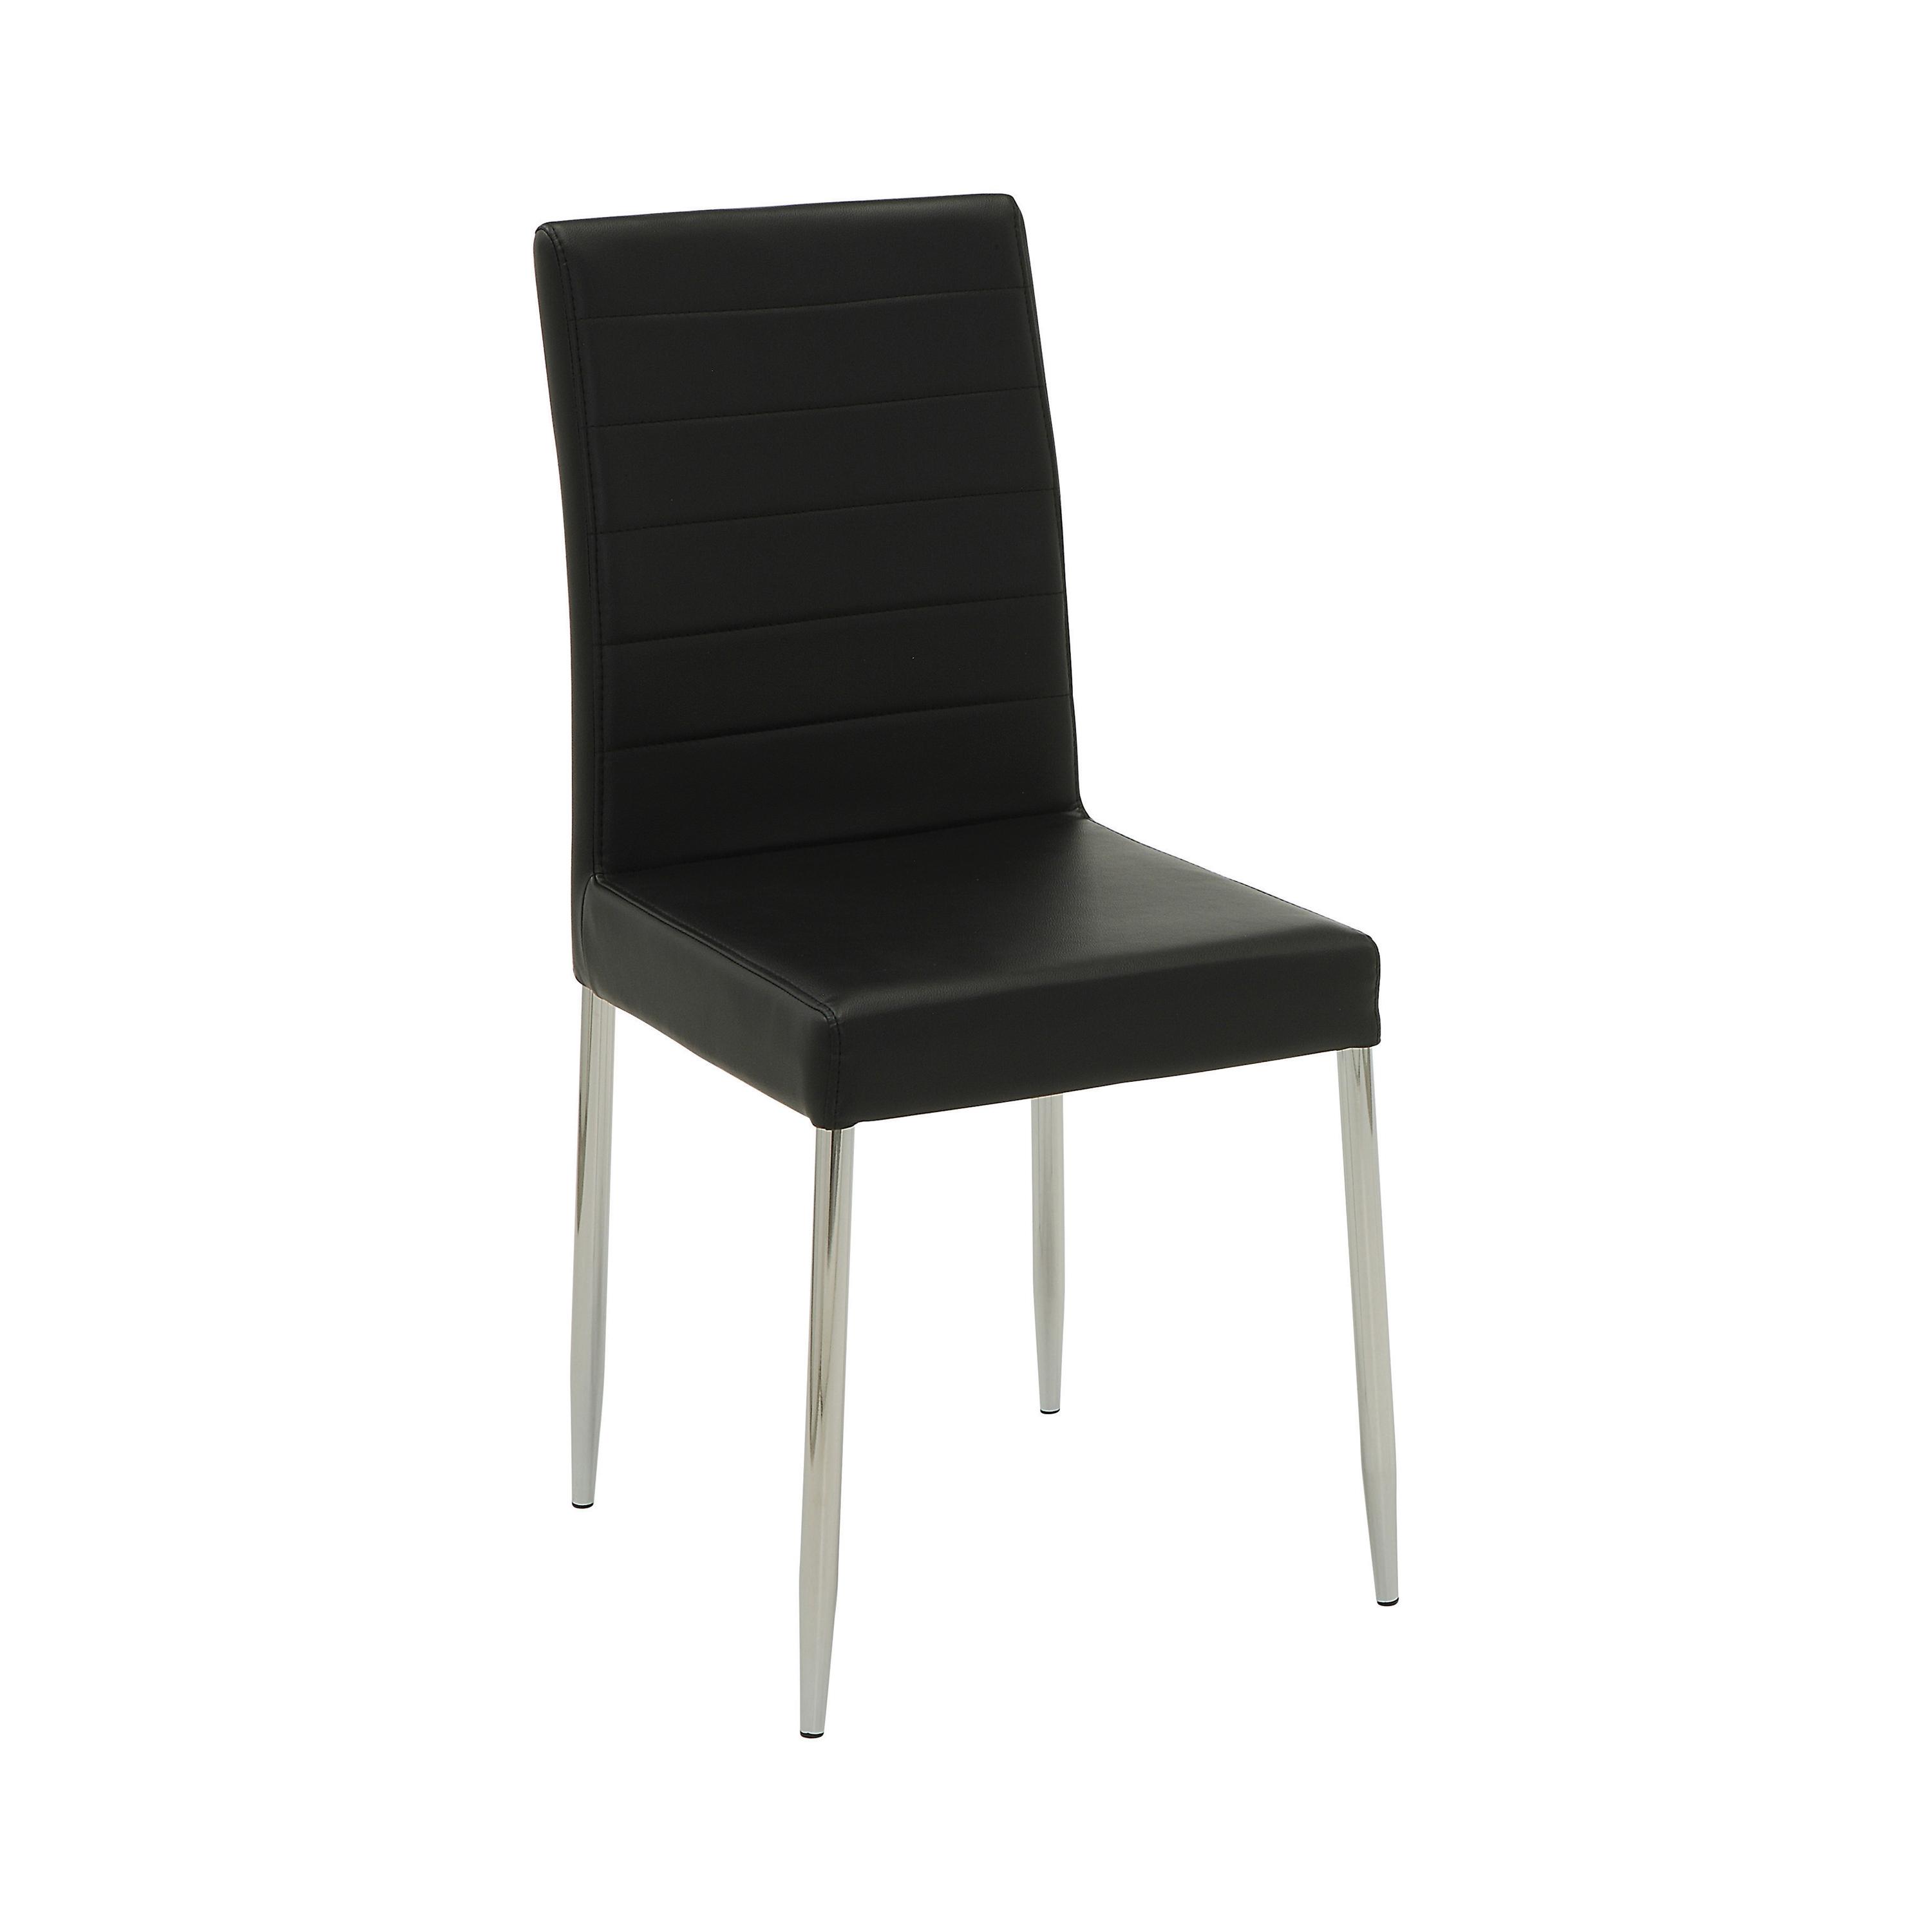 Contemporary Dining Chair Set 120767BLK Vance 120767BLK in Black Leatherette